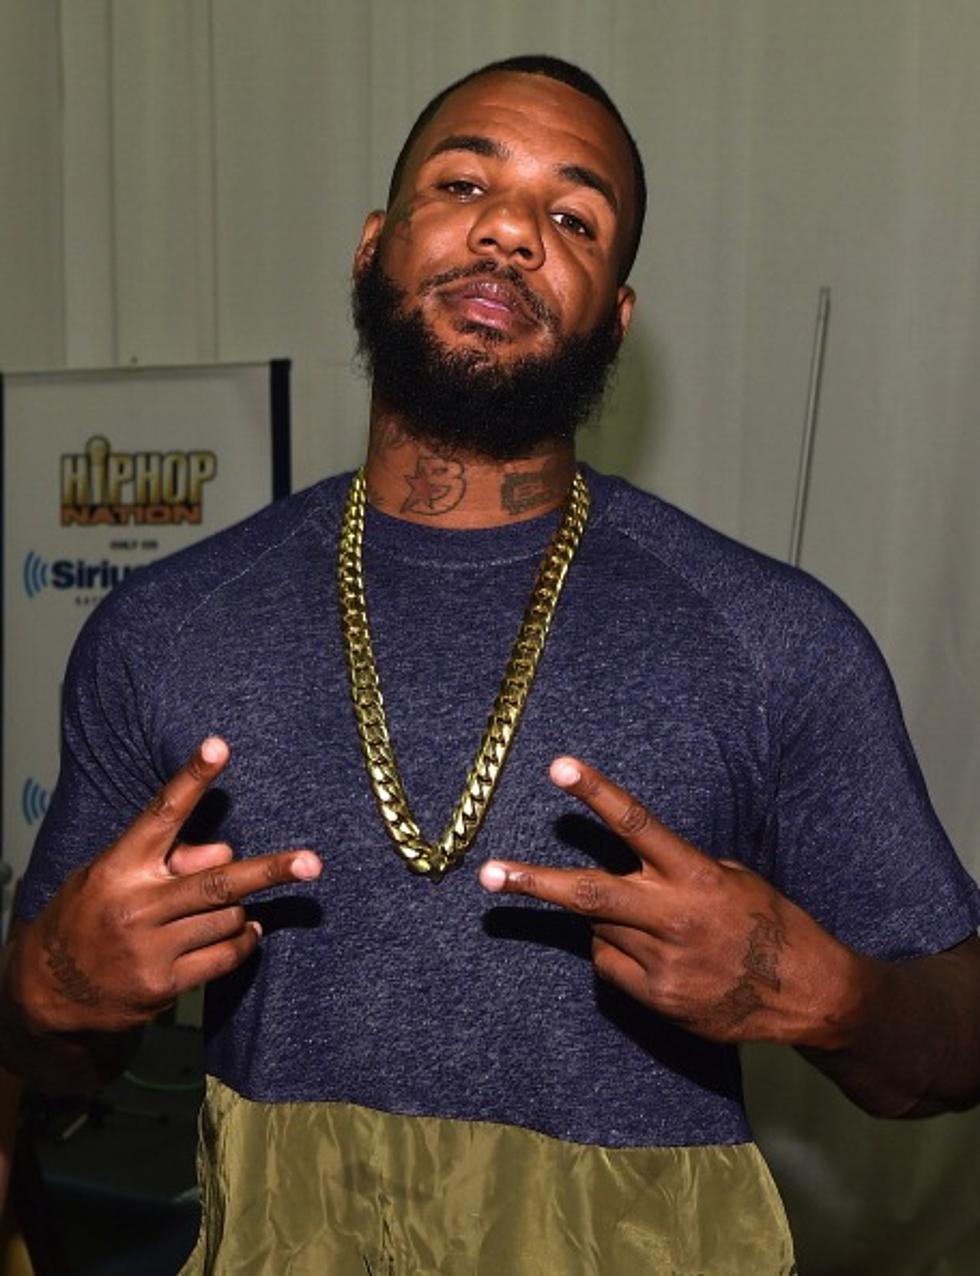 13 Rappers With Intense Beards